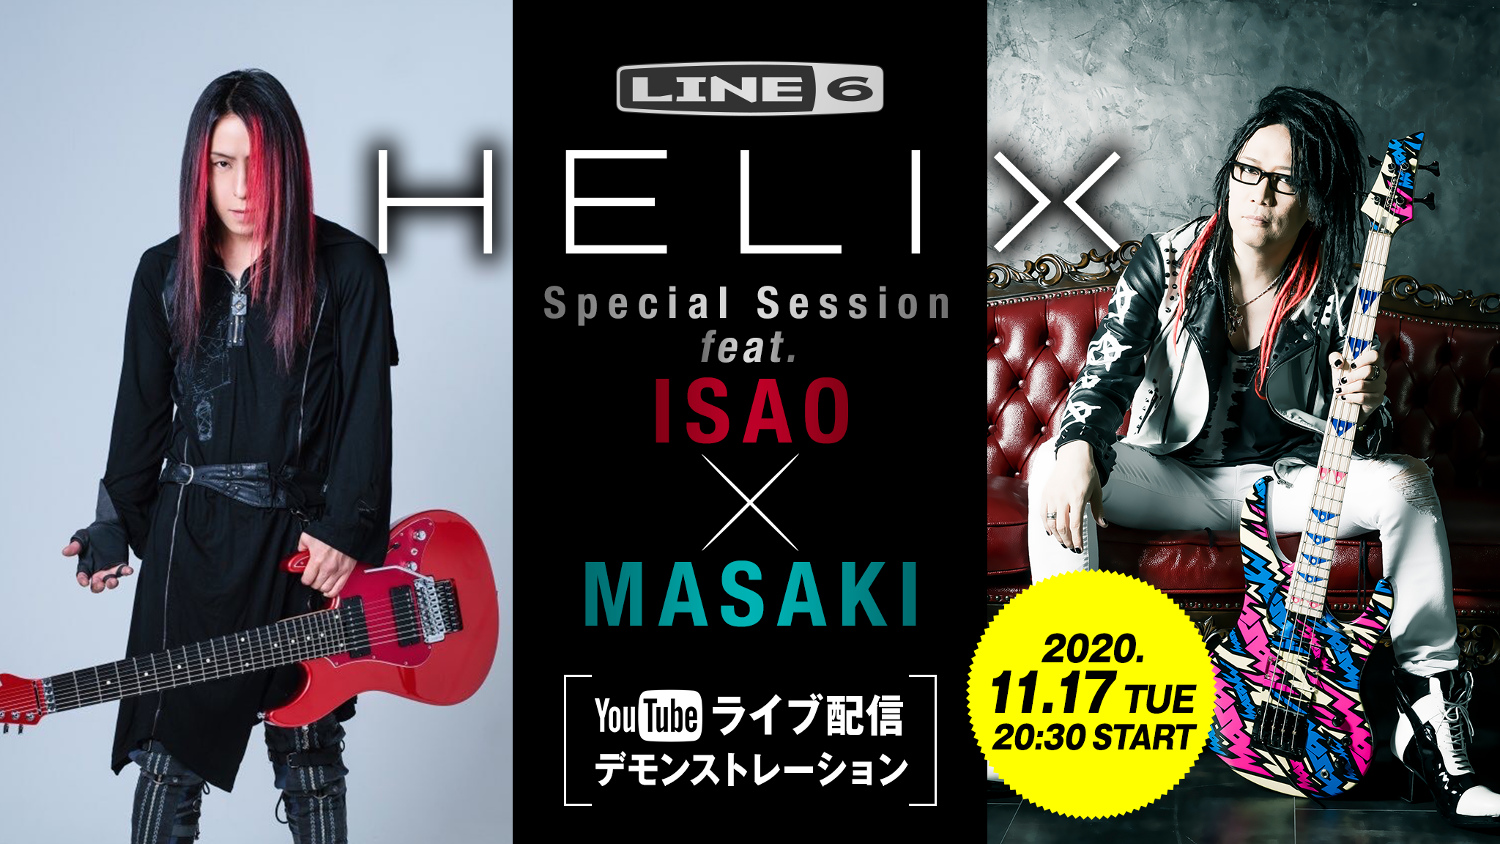 Helix Special Session feat. ISAO × MASAKI ライブ配信デモンストレーション